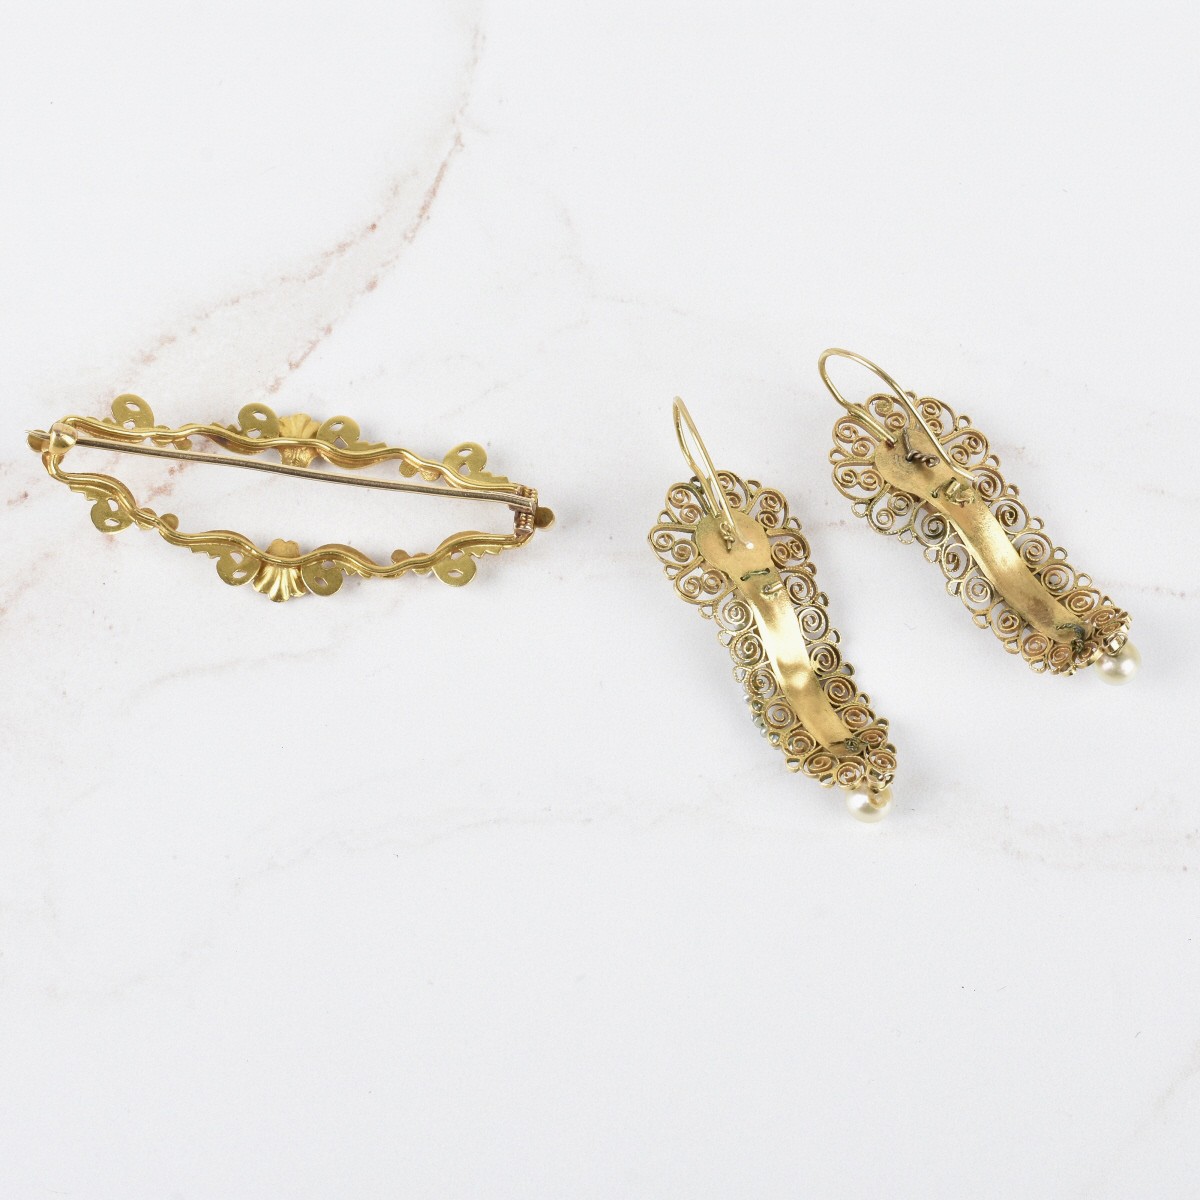 Antique 14K and Pearl Earrings and Pin